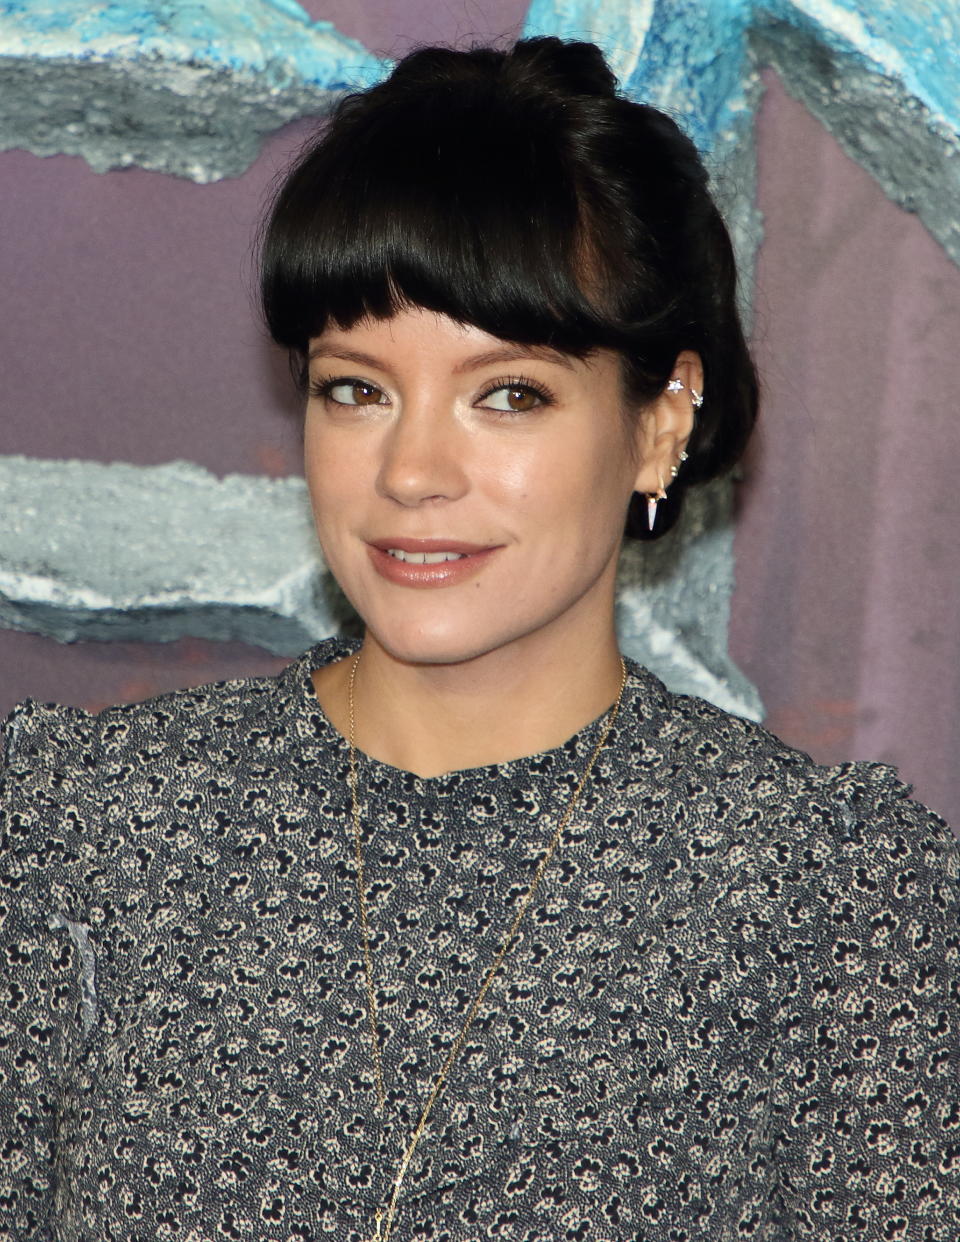 Lily Allen attends the "Frozen 2" European premiere at BFI Southbank in London. (Photo by Keith Mayhew / SOPA Images/Sipa USA)